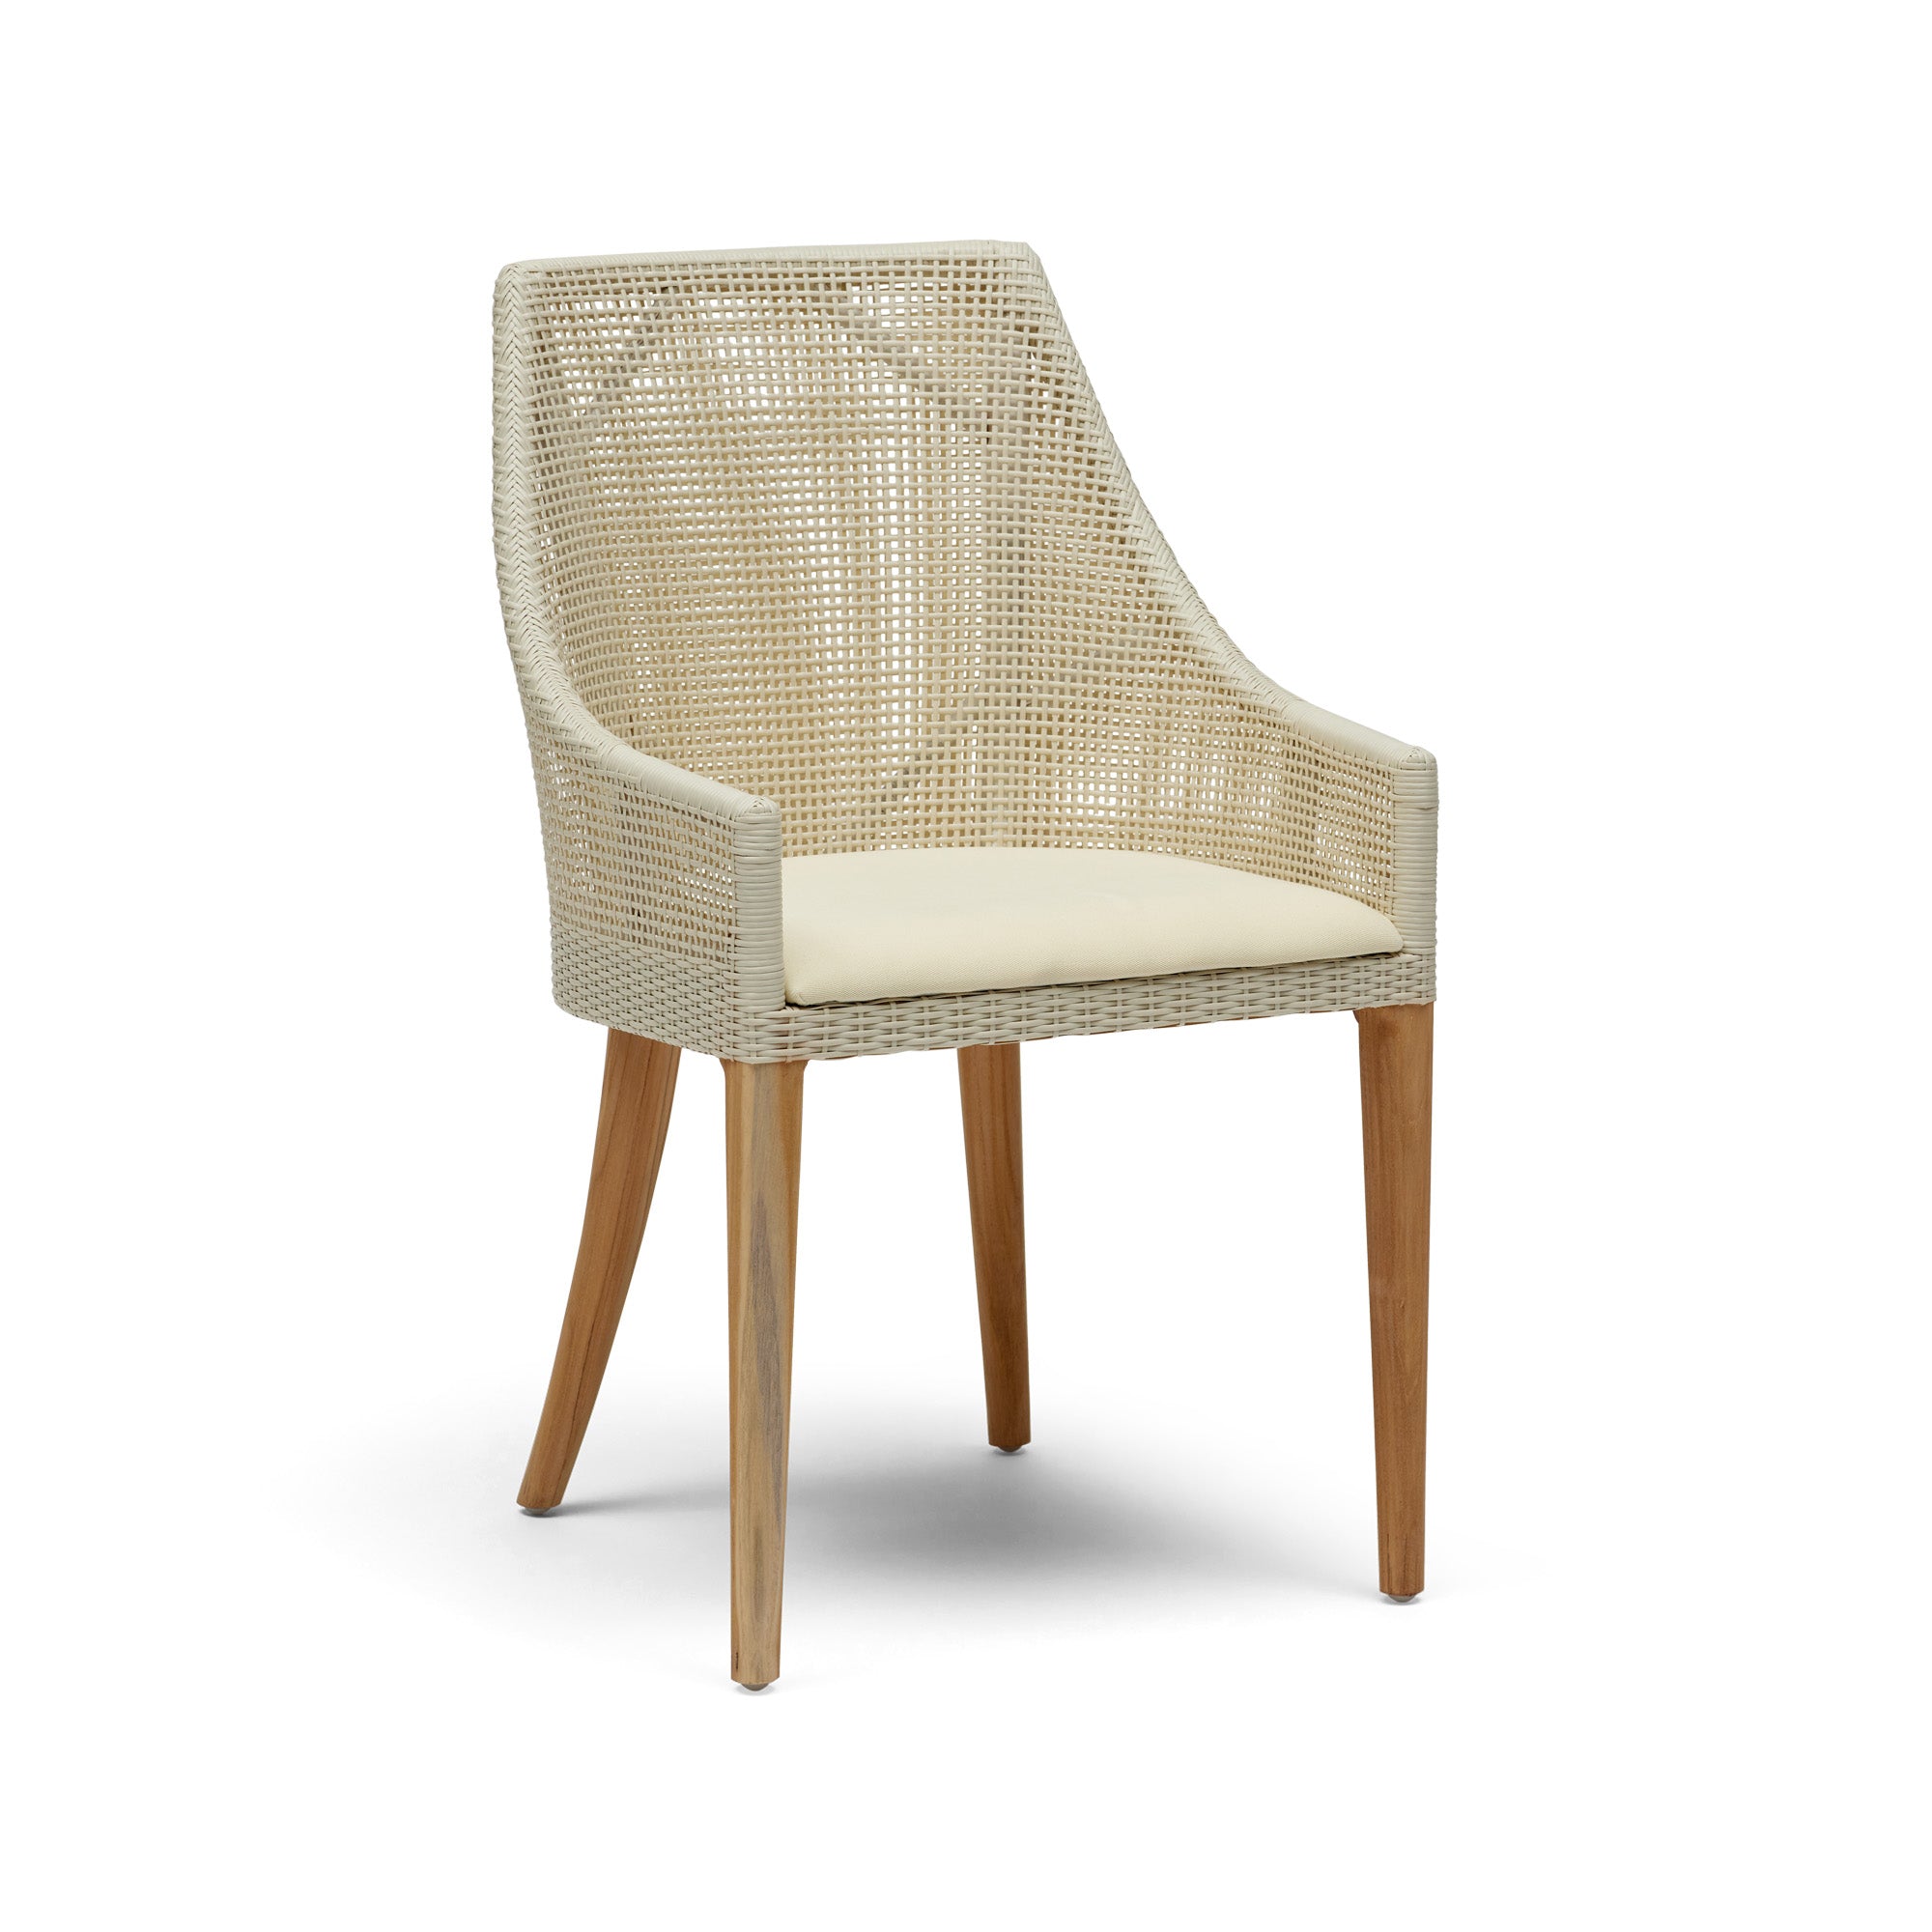 Remi Outdoor Dining Chair White